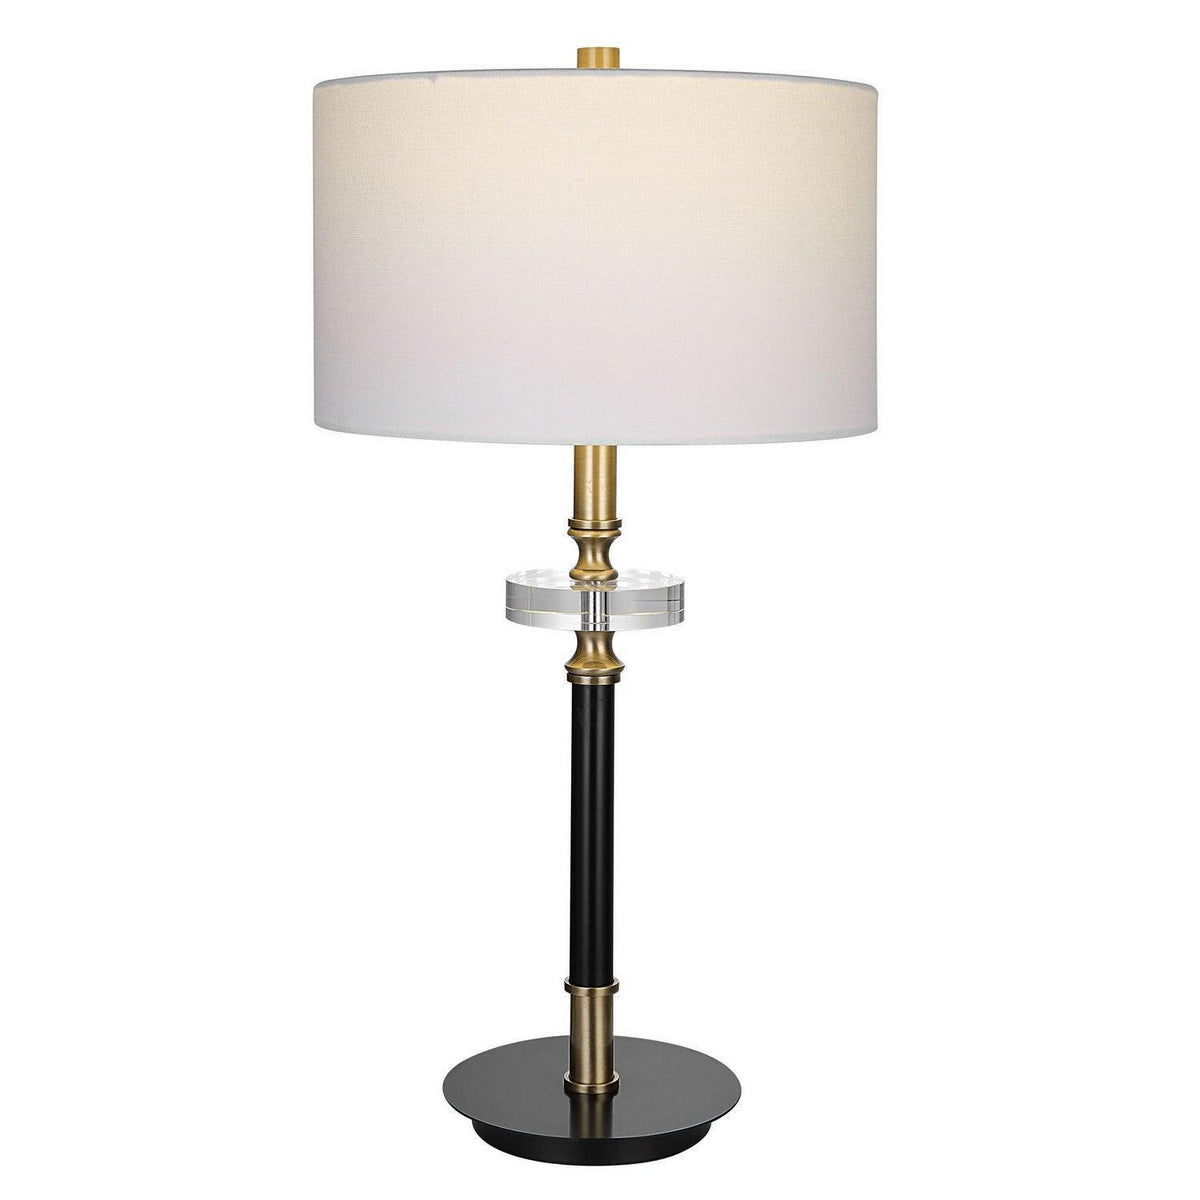 The Uttermost - Maud One Light Table Lamp - 29991-1 | Montreal Lighting & Hardware